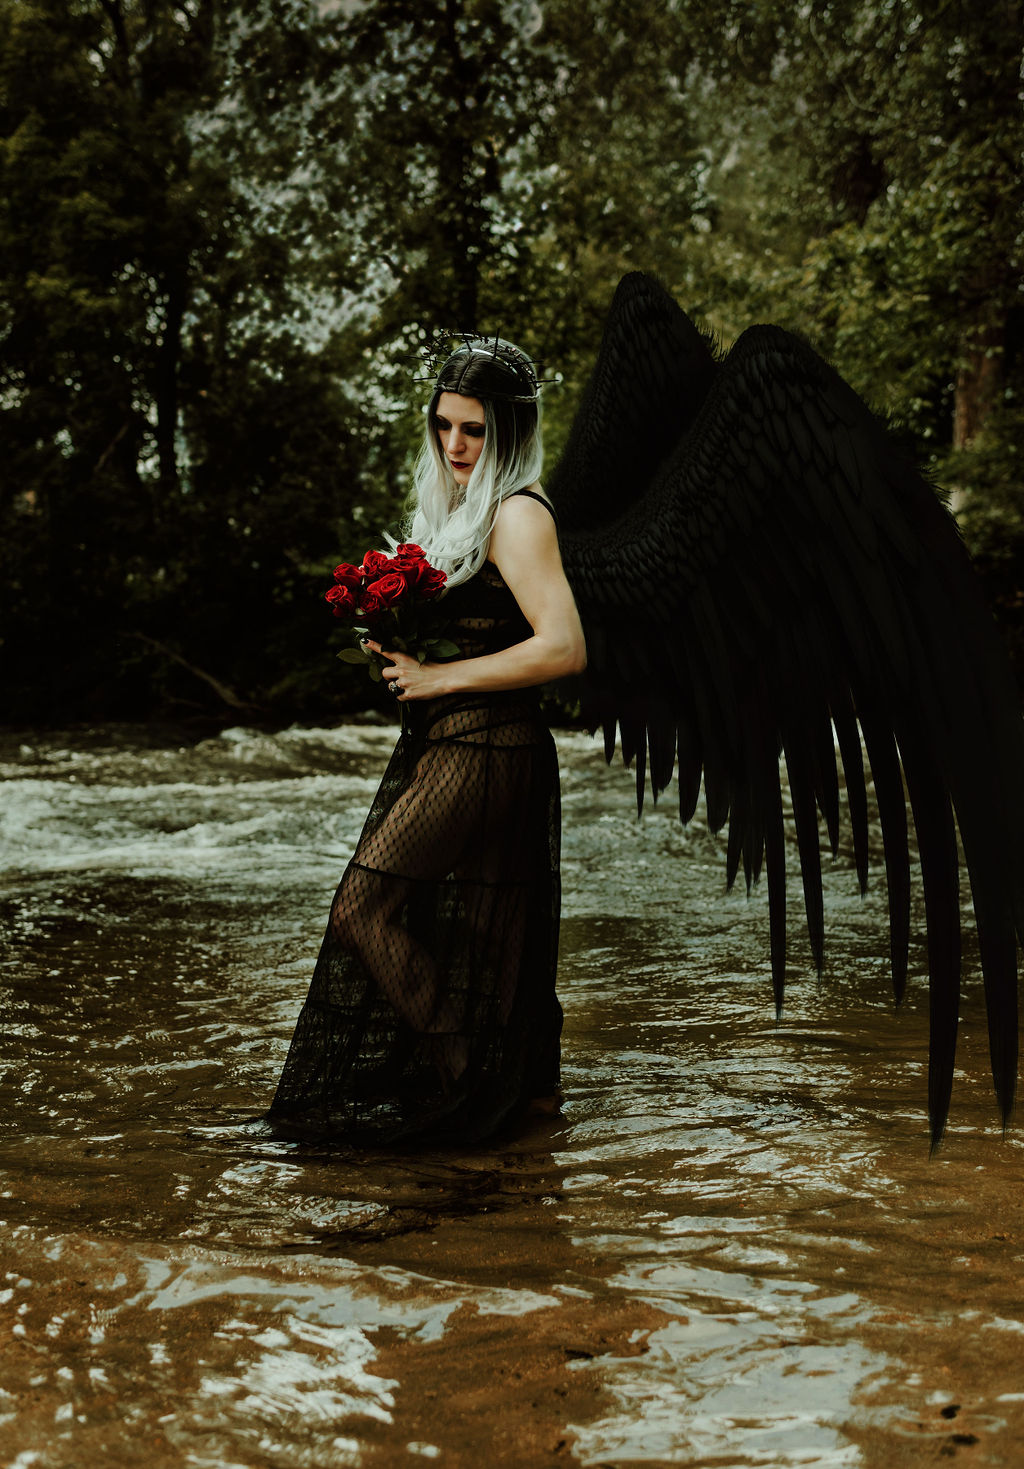 A woman with large black wings stands in a shallow river. The woman is wearing a long black dress and holding a bouquet of red roses.